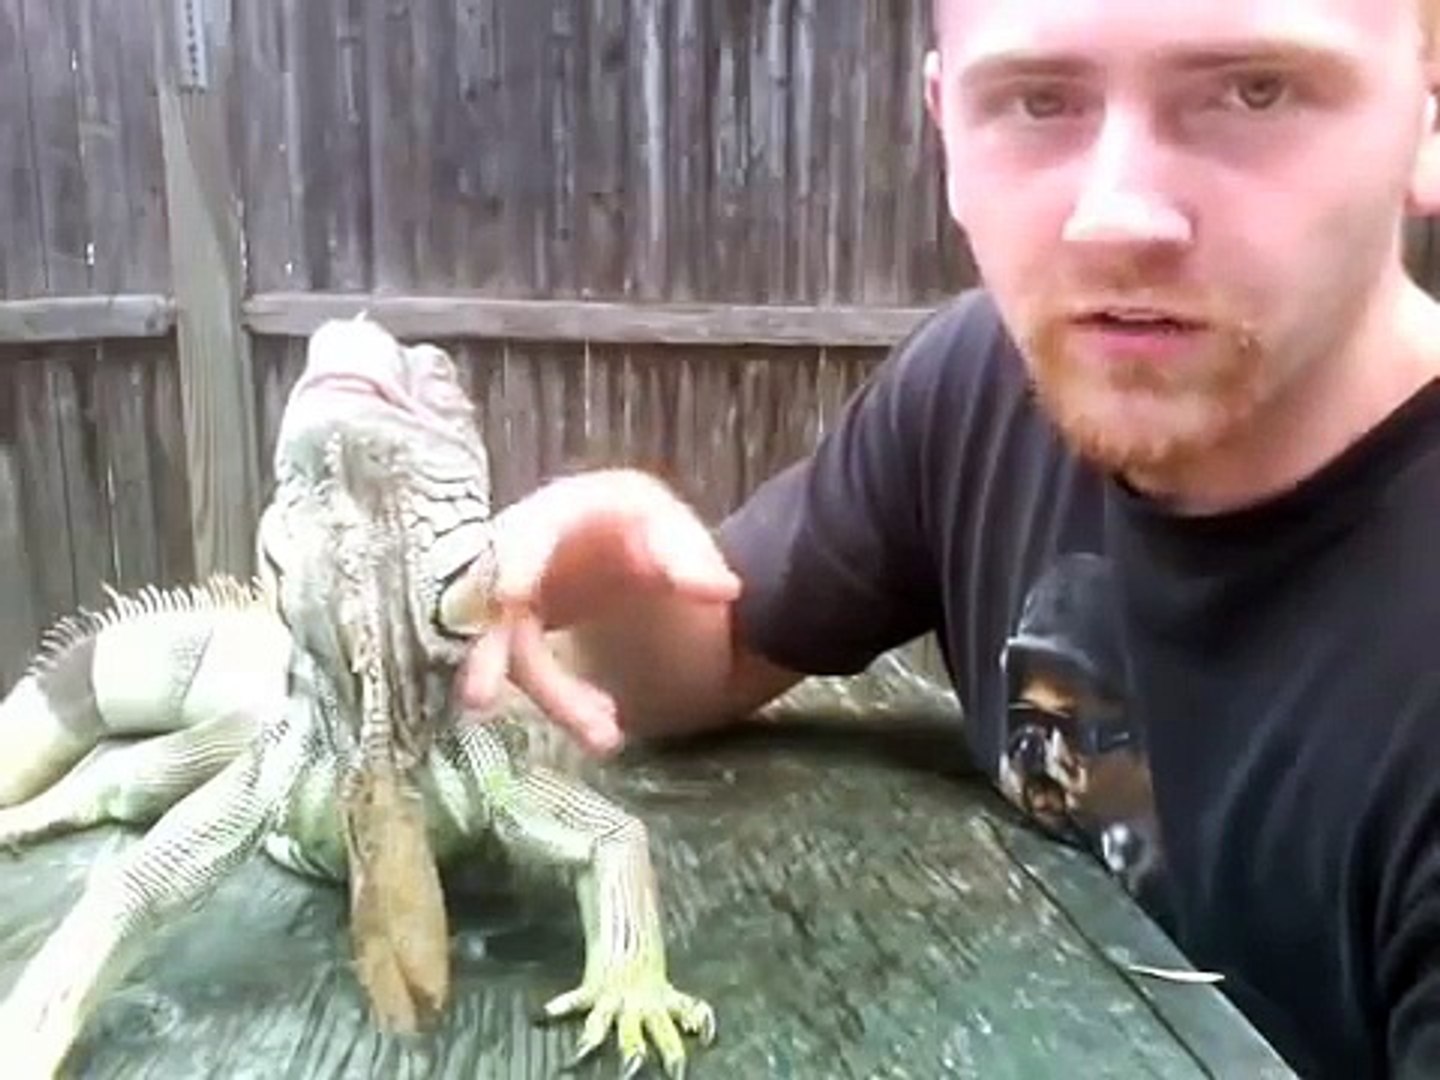 Iguana care tutorial live for 20 years